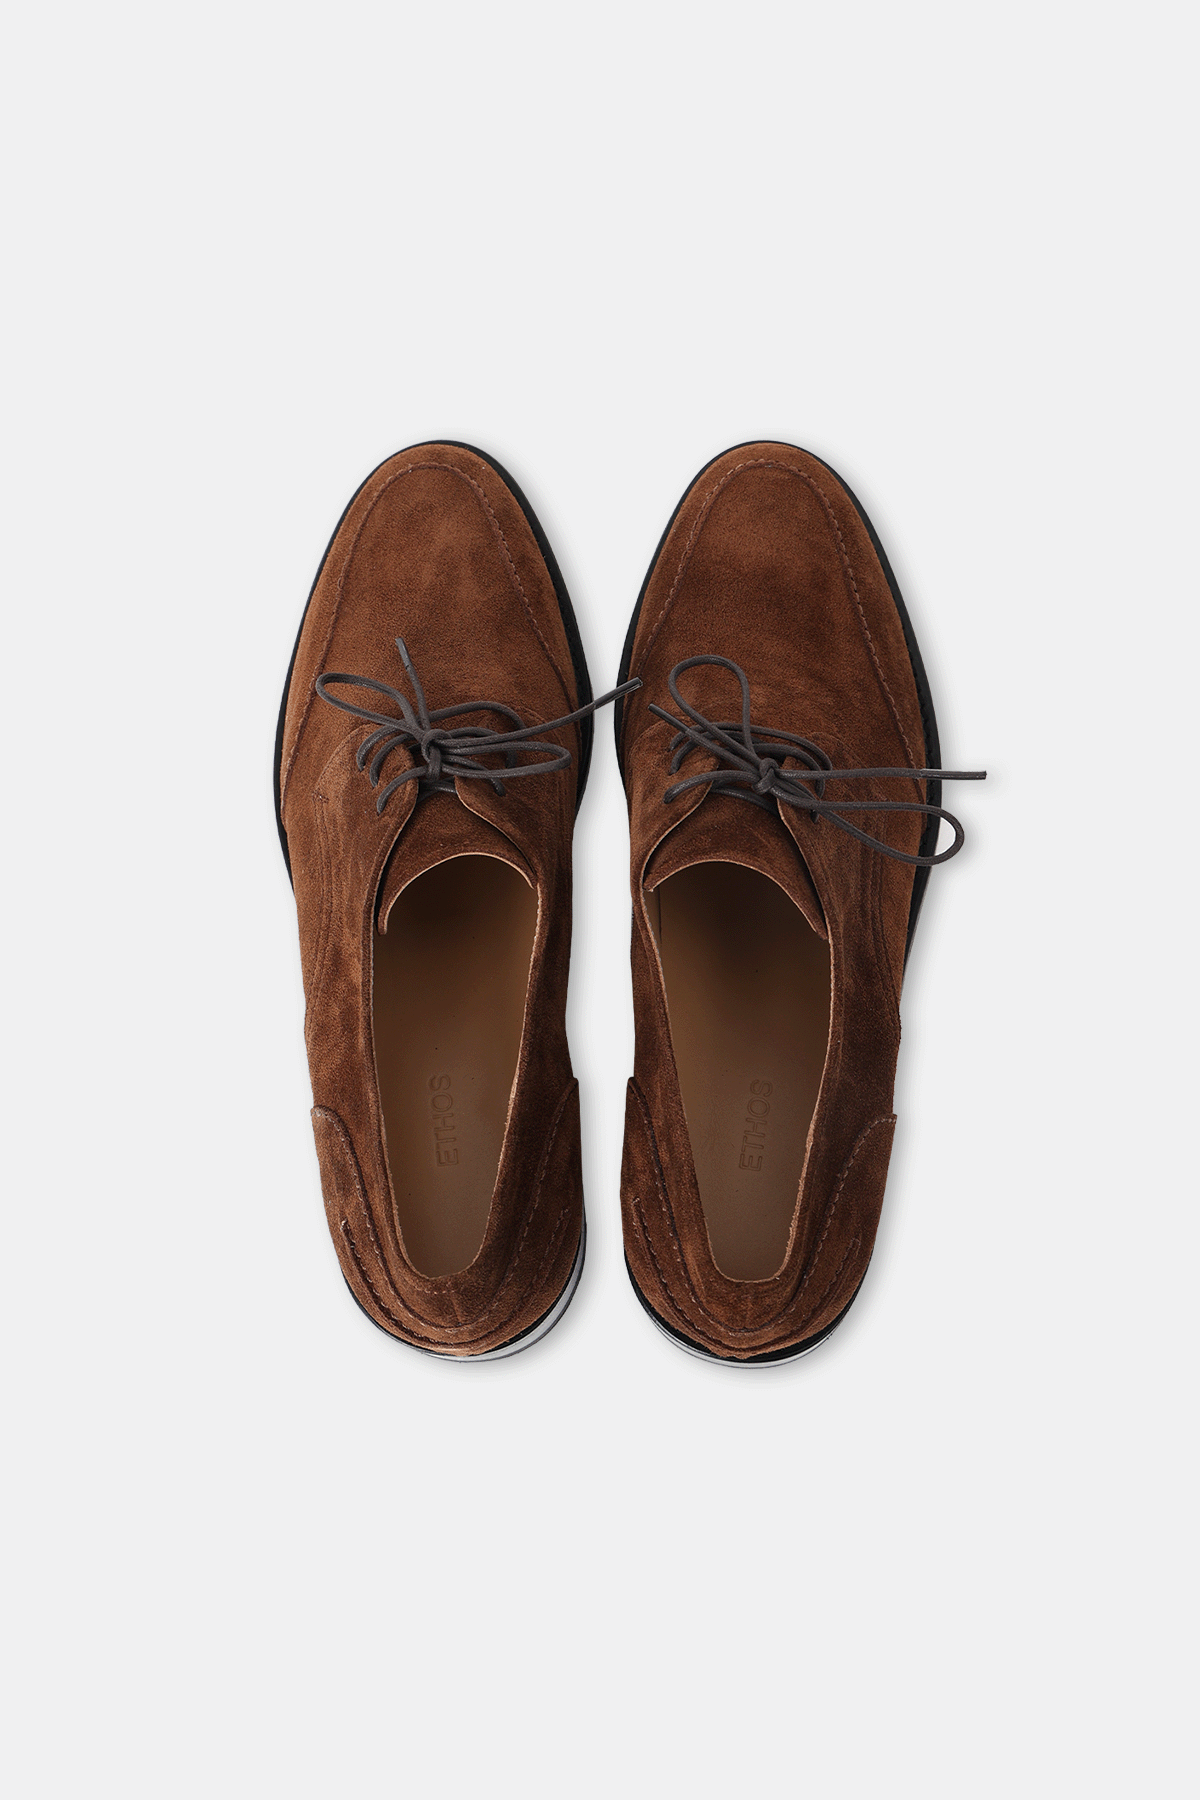 SUEDE OXFORD SHOES